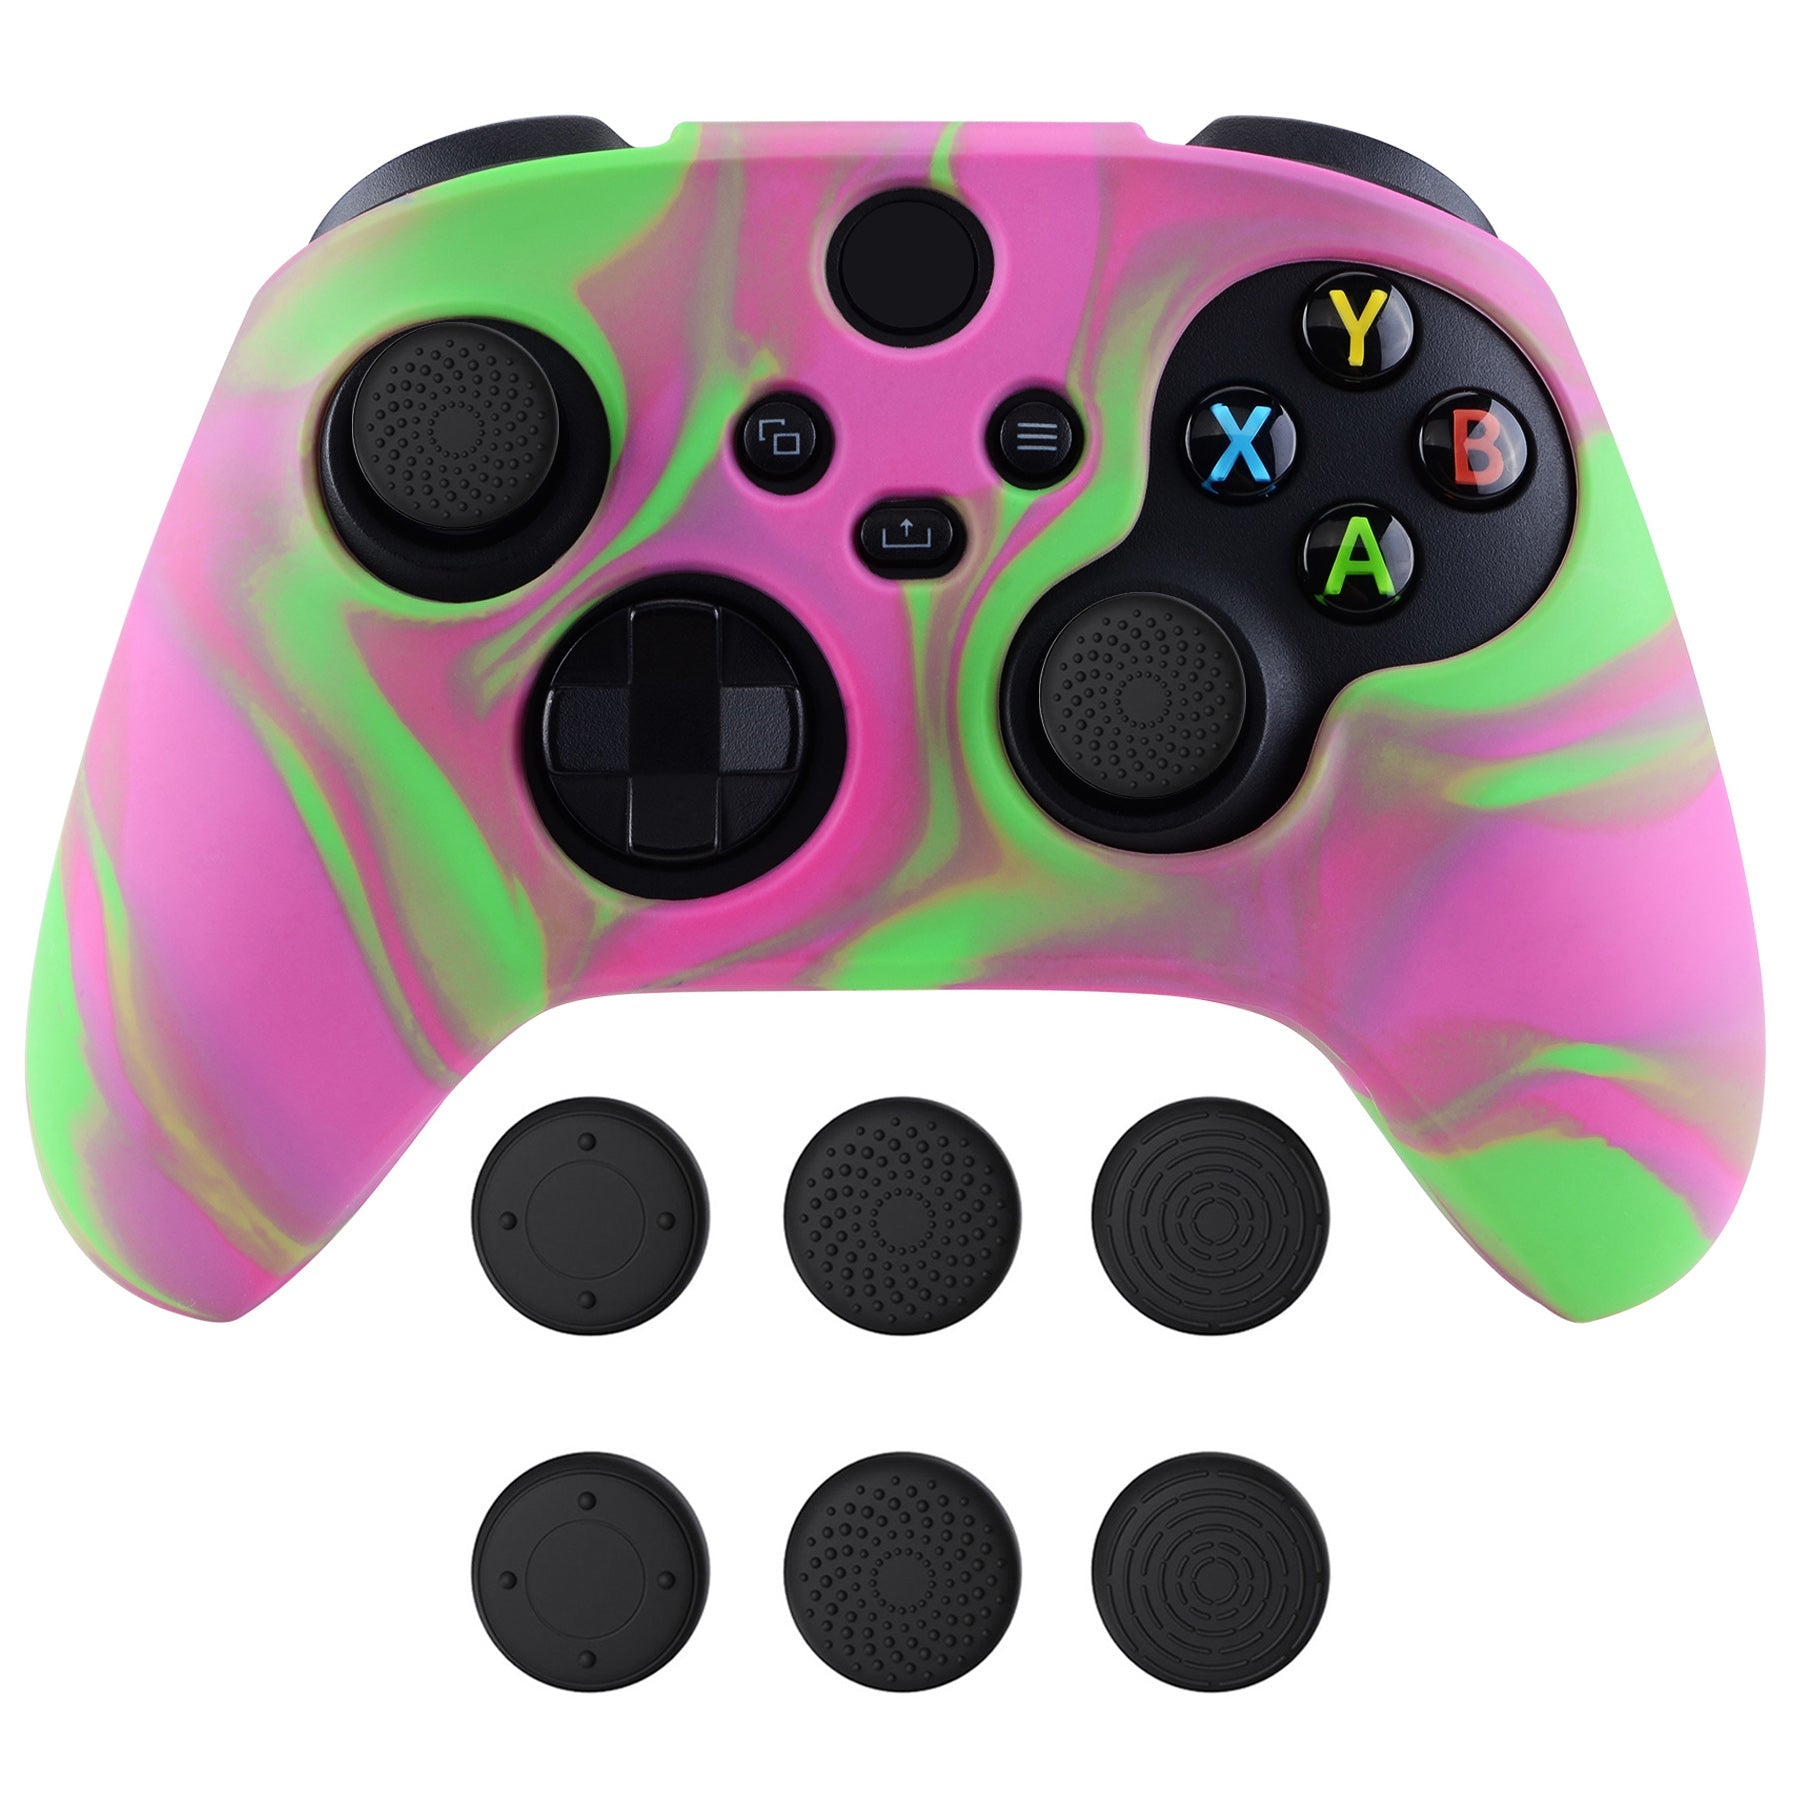 PlayVital Two Tone Pink & Green Camouflage Anti-Slip Silicone Cover Skin for Xbox Series X Controller, Soft Rubber Case Protector for Xbox Series S Controller with Black Thumb Grip Caps - BLX3014 PlayVital